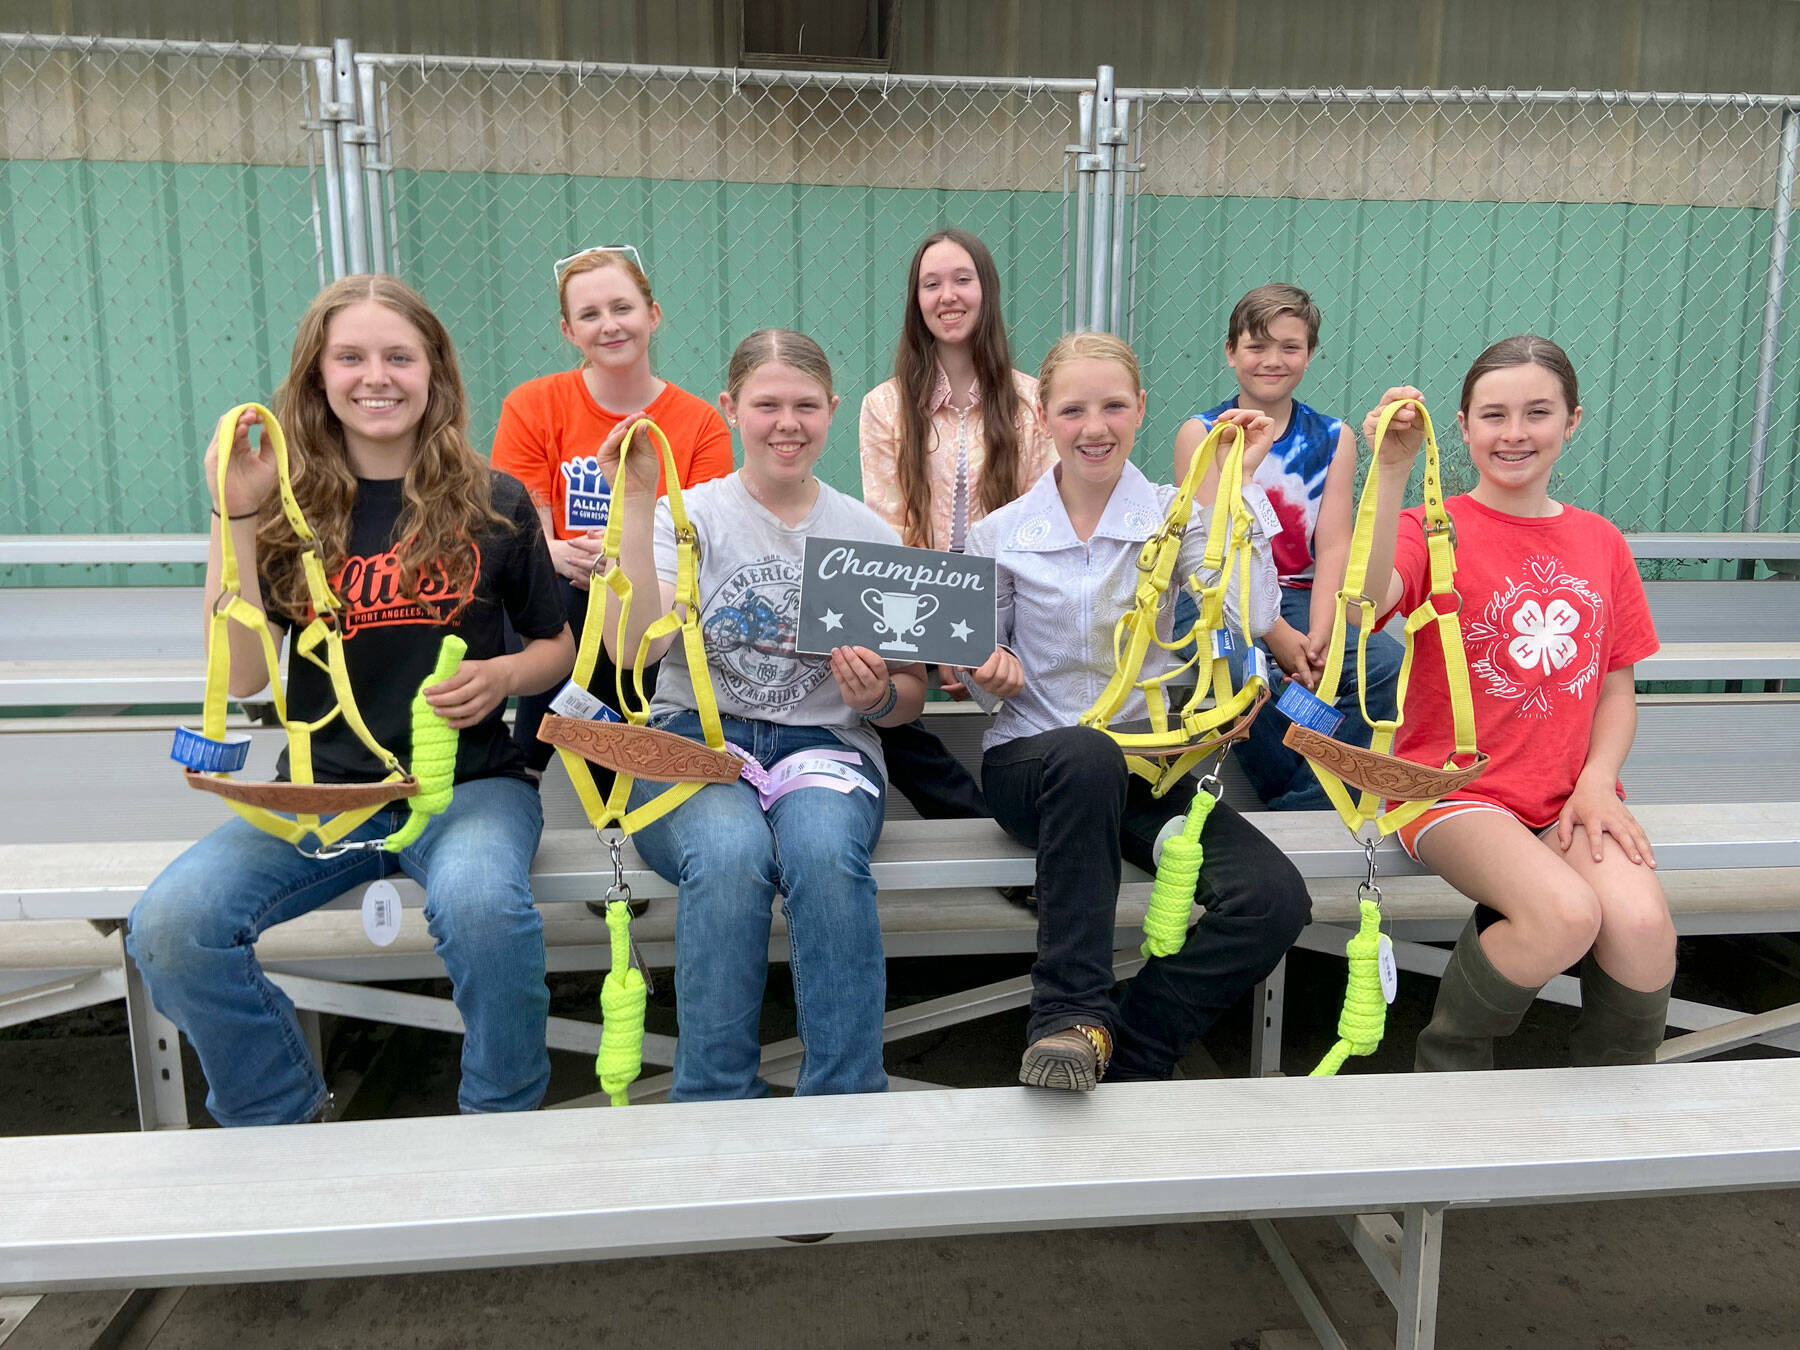 4-H horse club pre fair show high point winners at the Clallam County Fairgrounds are, front row from left: Taylor Maughan, Savannah Bolton, Asha Swanberg, Lila Torey. Back row from left: Ruby Coulson, Katelynn Sharpe and Aiden Johnstad. (Submitted by Katie Newton)